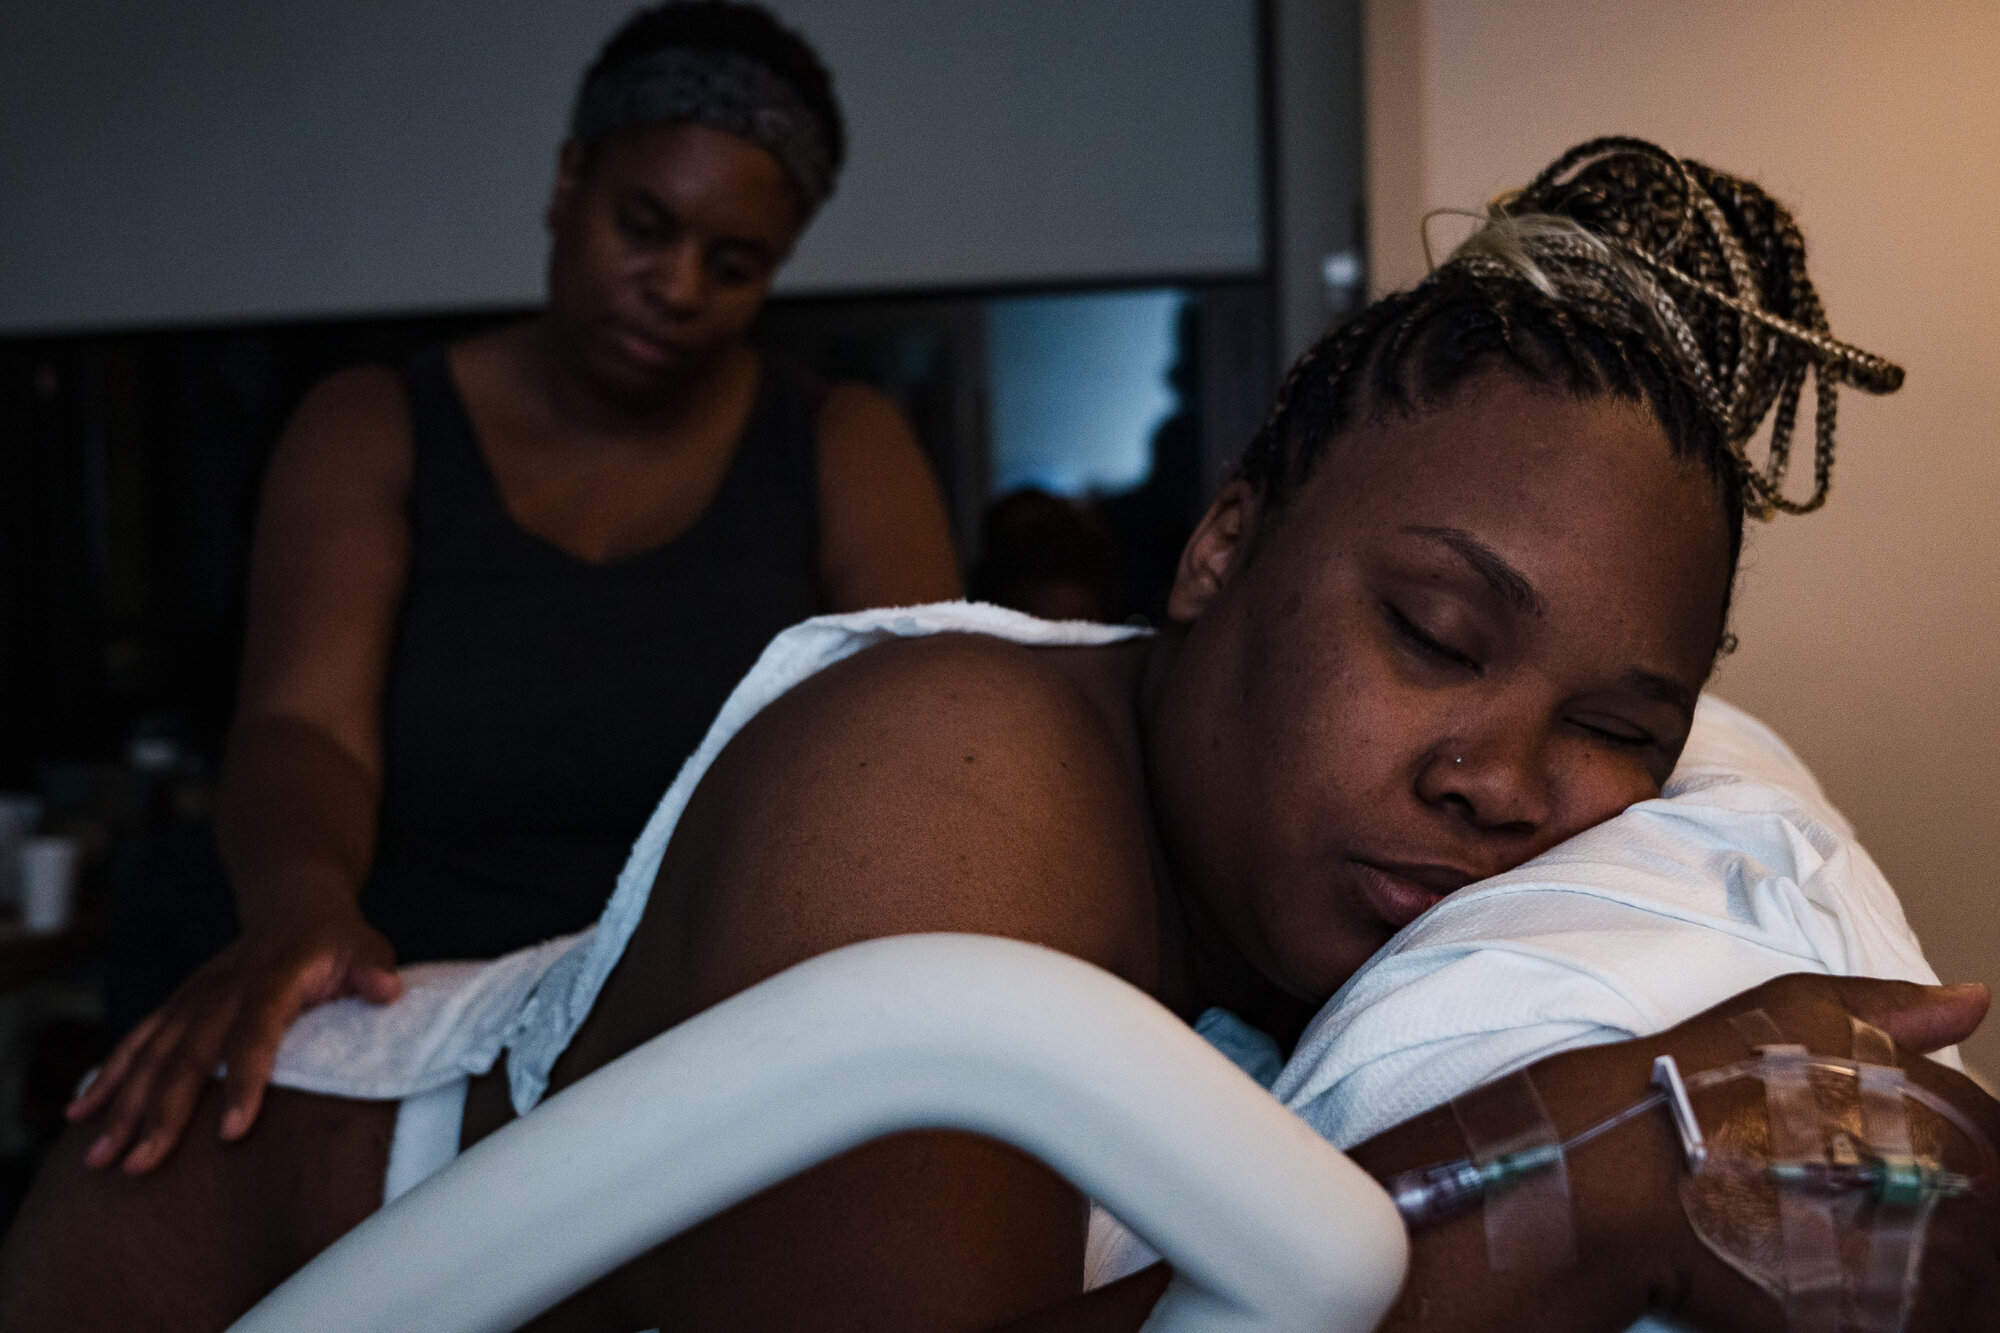 Gather Birth Cooperative- Doula Support and Birth Photography in Minneapolis - August 16, 2019 - 210404.jpg